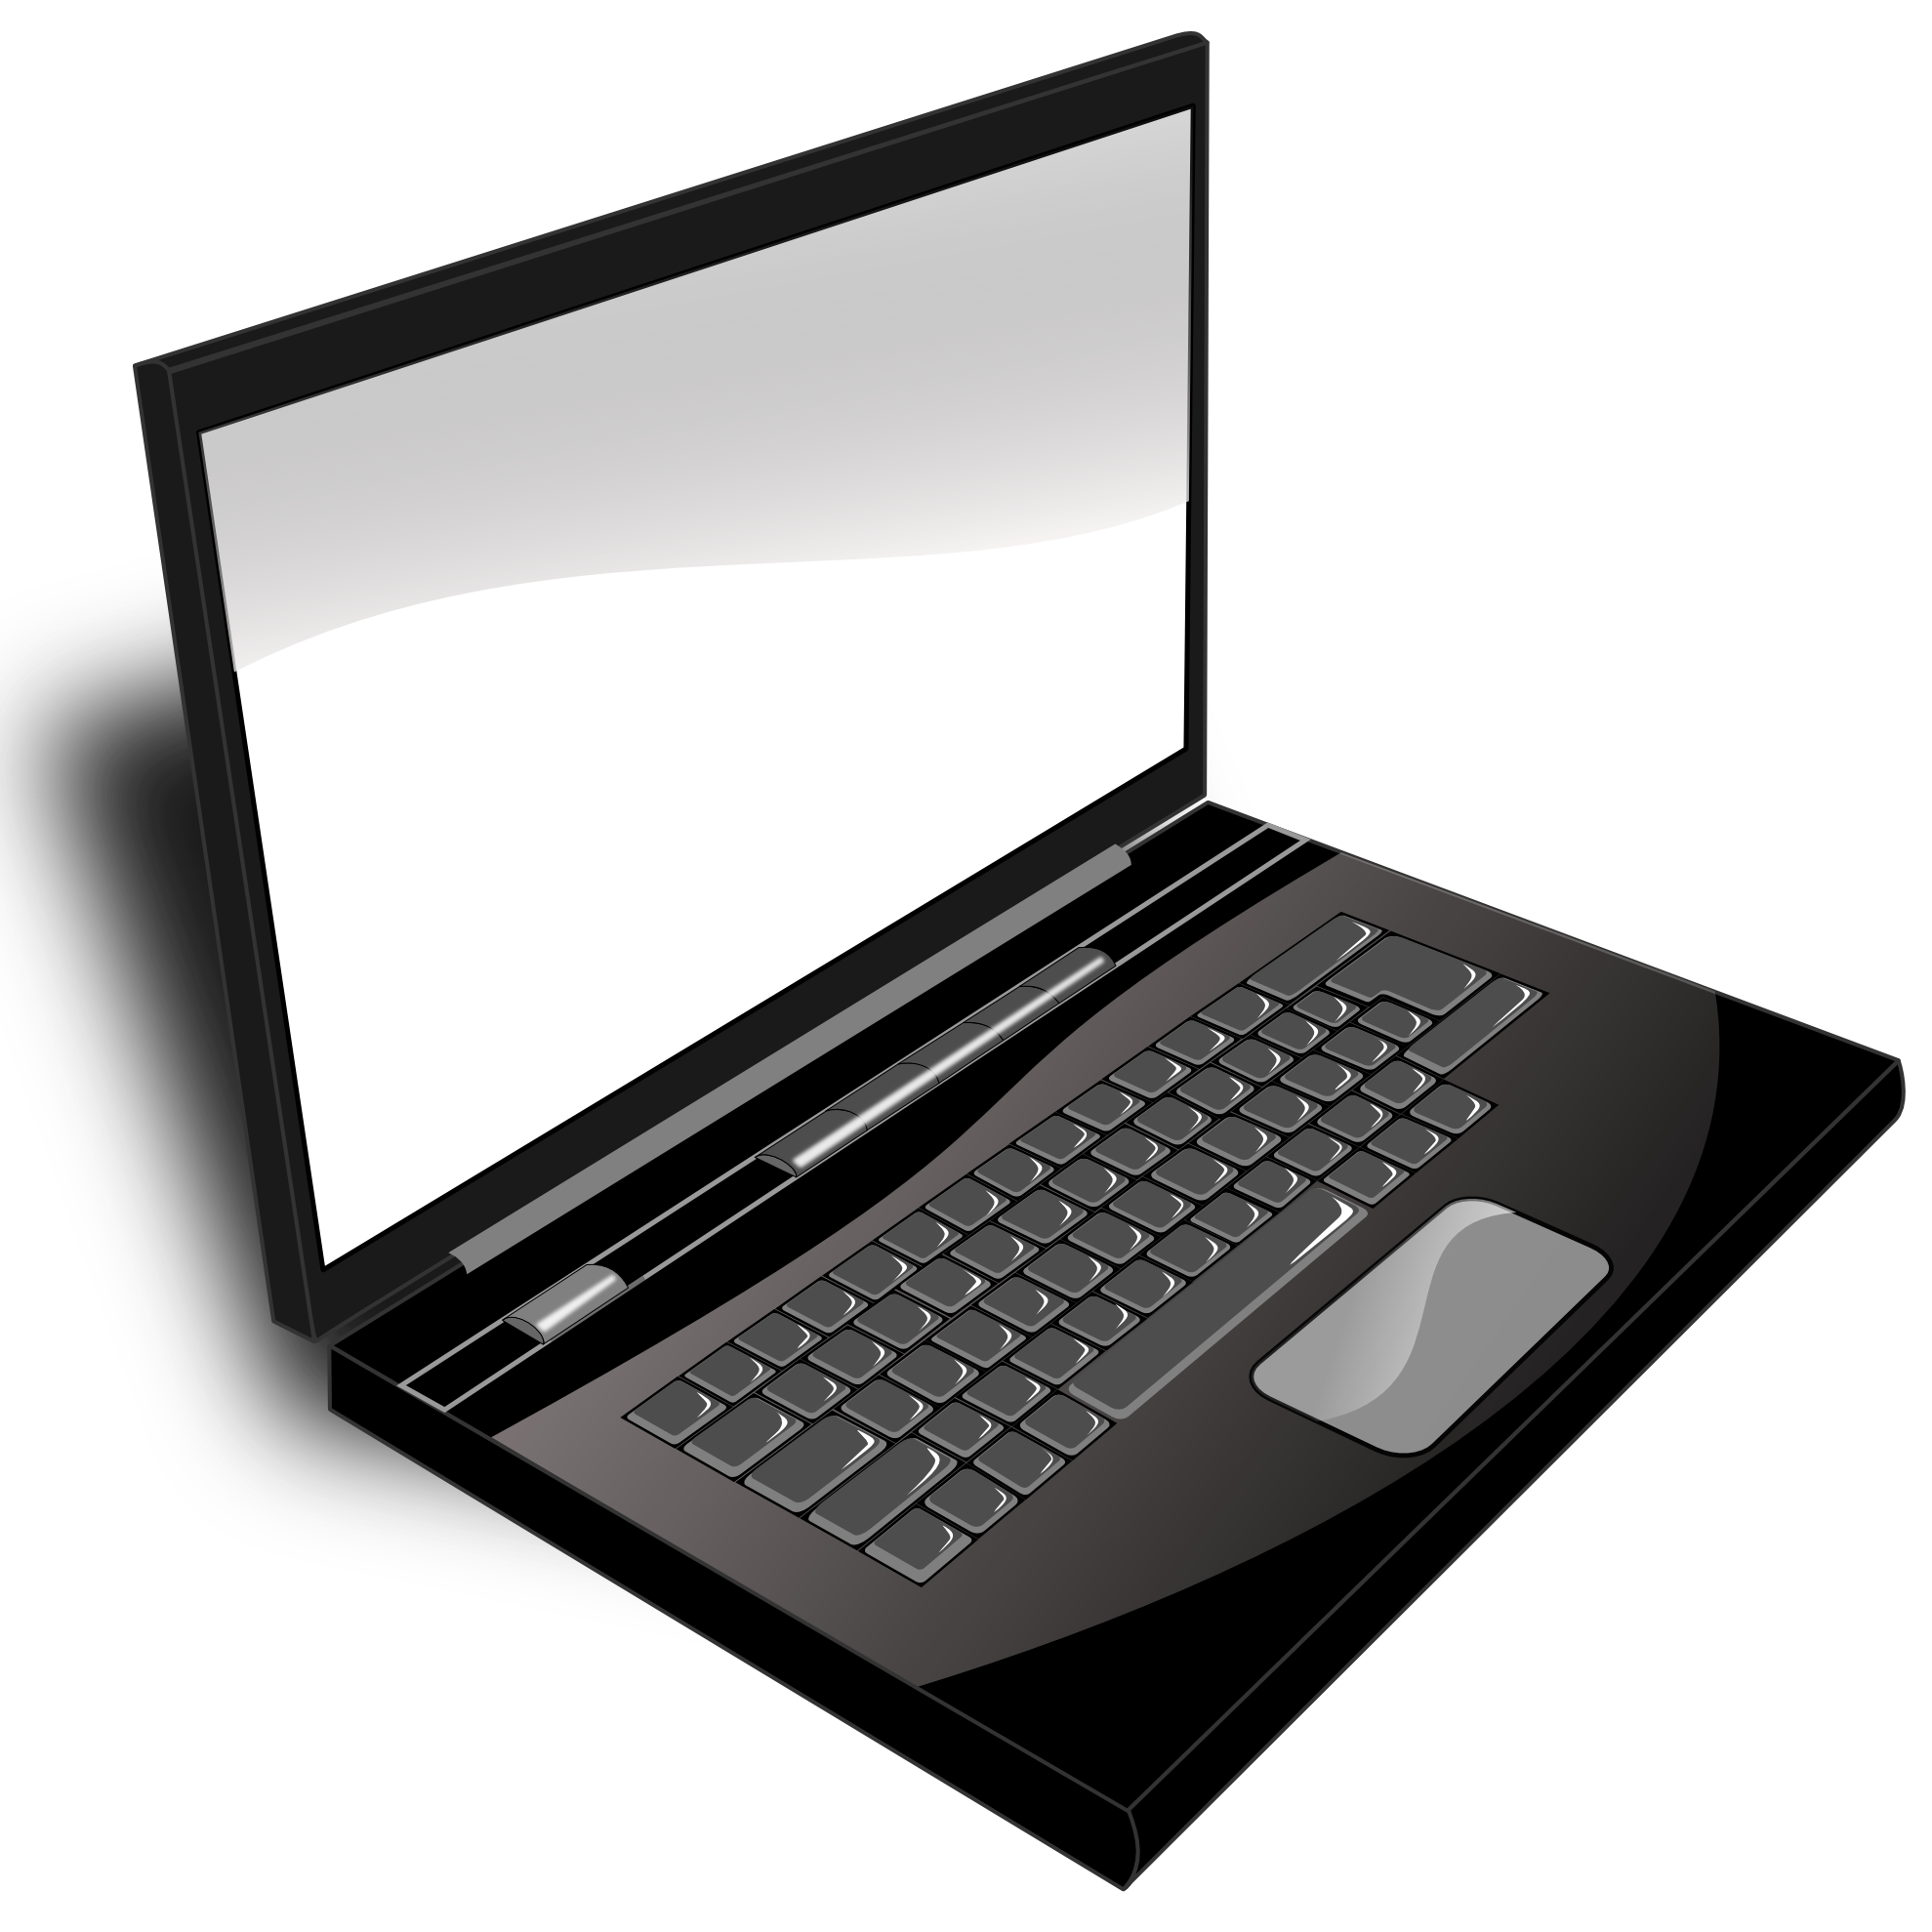 Laptop computer free clipart for kids